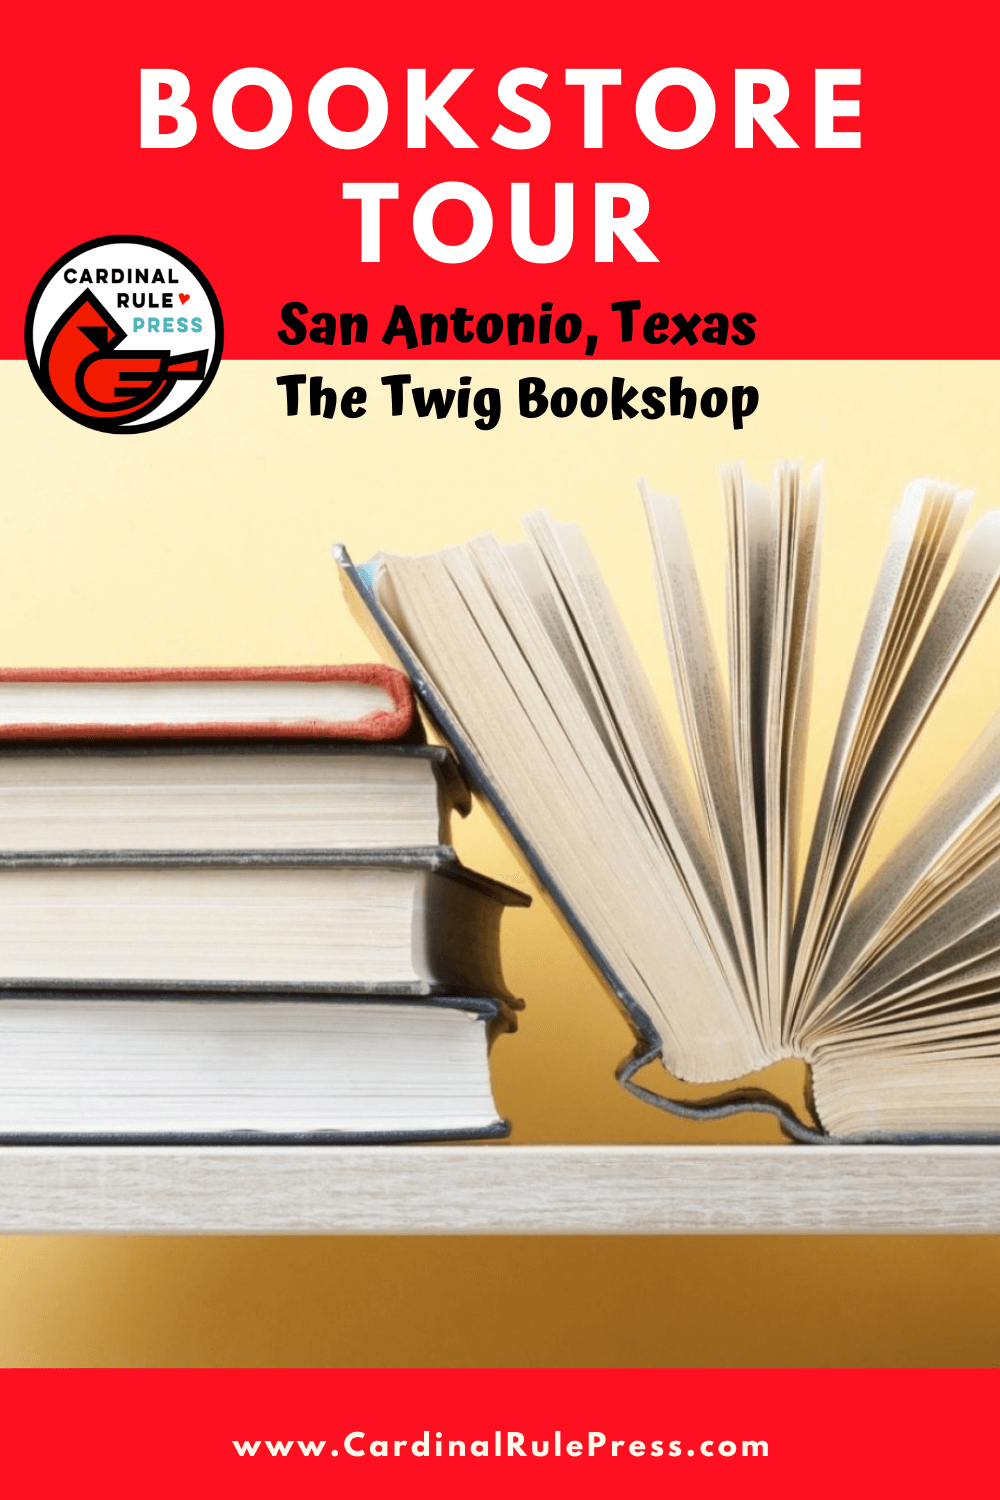 Bookstore Tour: The Twig Bookshop in San Antonio, TX-We got to take an inside look into these creative spaces that house our favorite things---books and books and readers!
#Bookstore #BookstoreTour #SummerTour